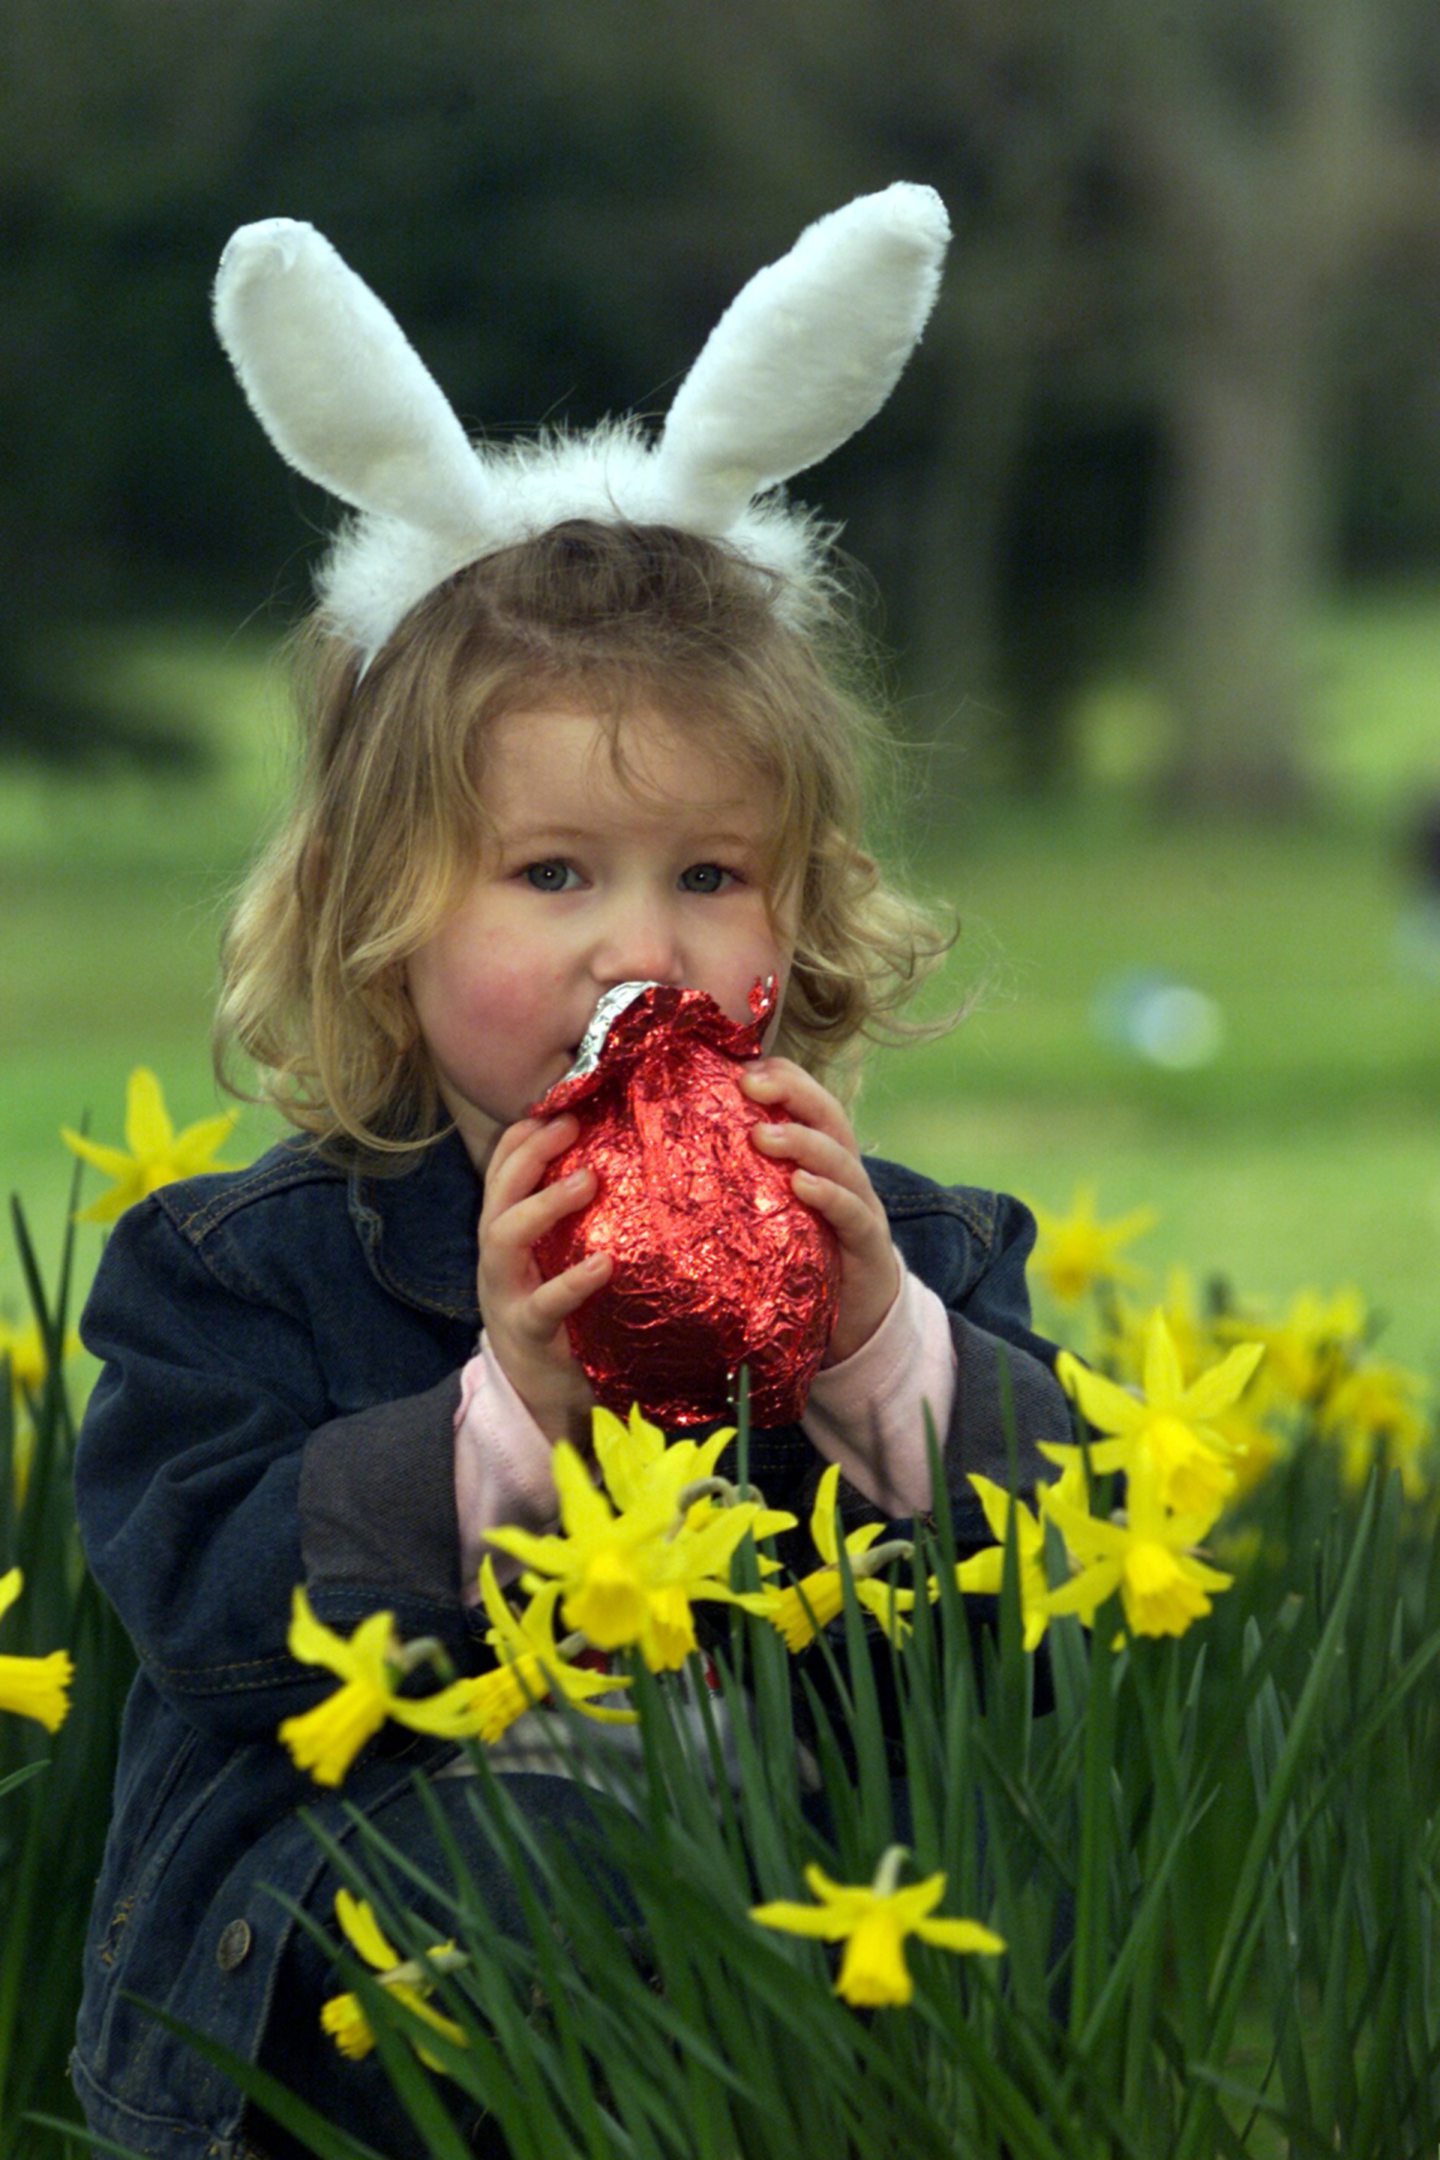 Suzanne Holt, 2, was caught nibbling a chocolate egg by our photographer in 2002.